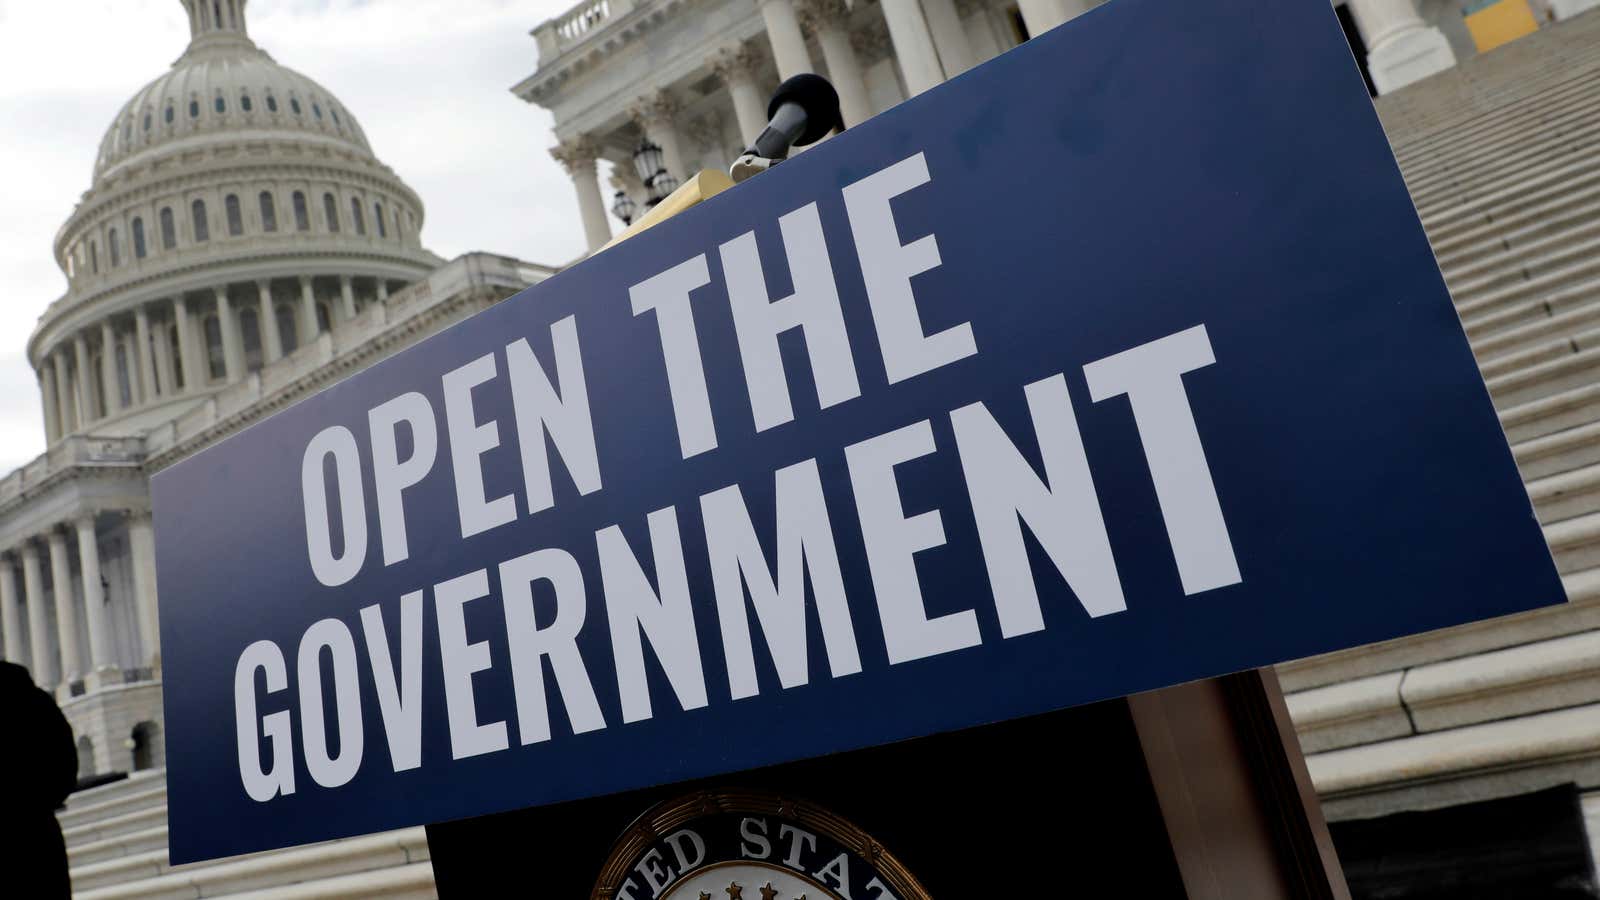 The government shutdown has Americans feeling pessimistic.